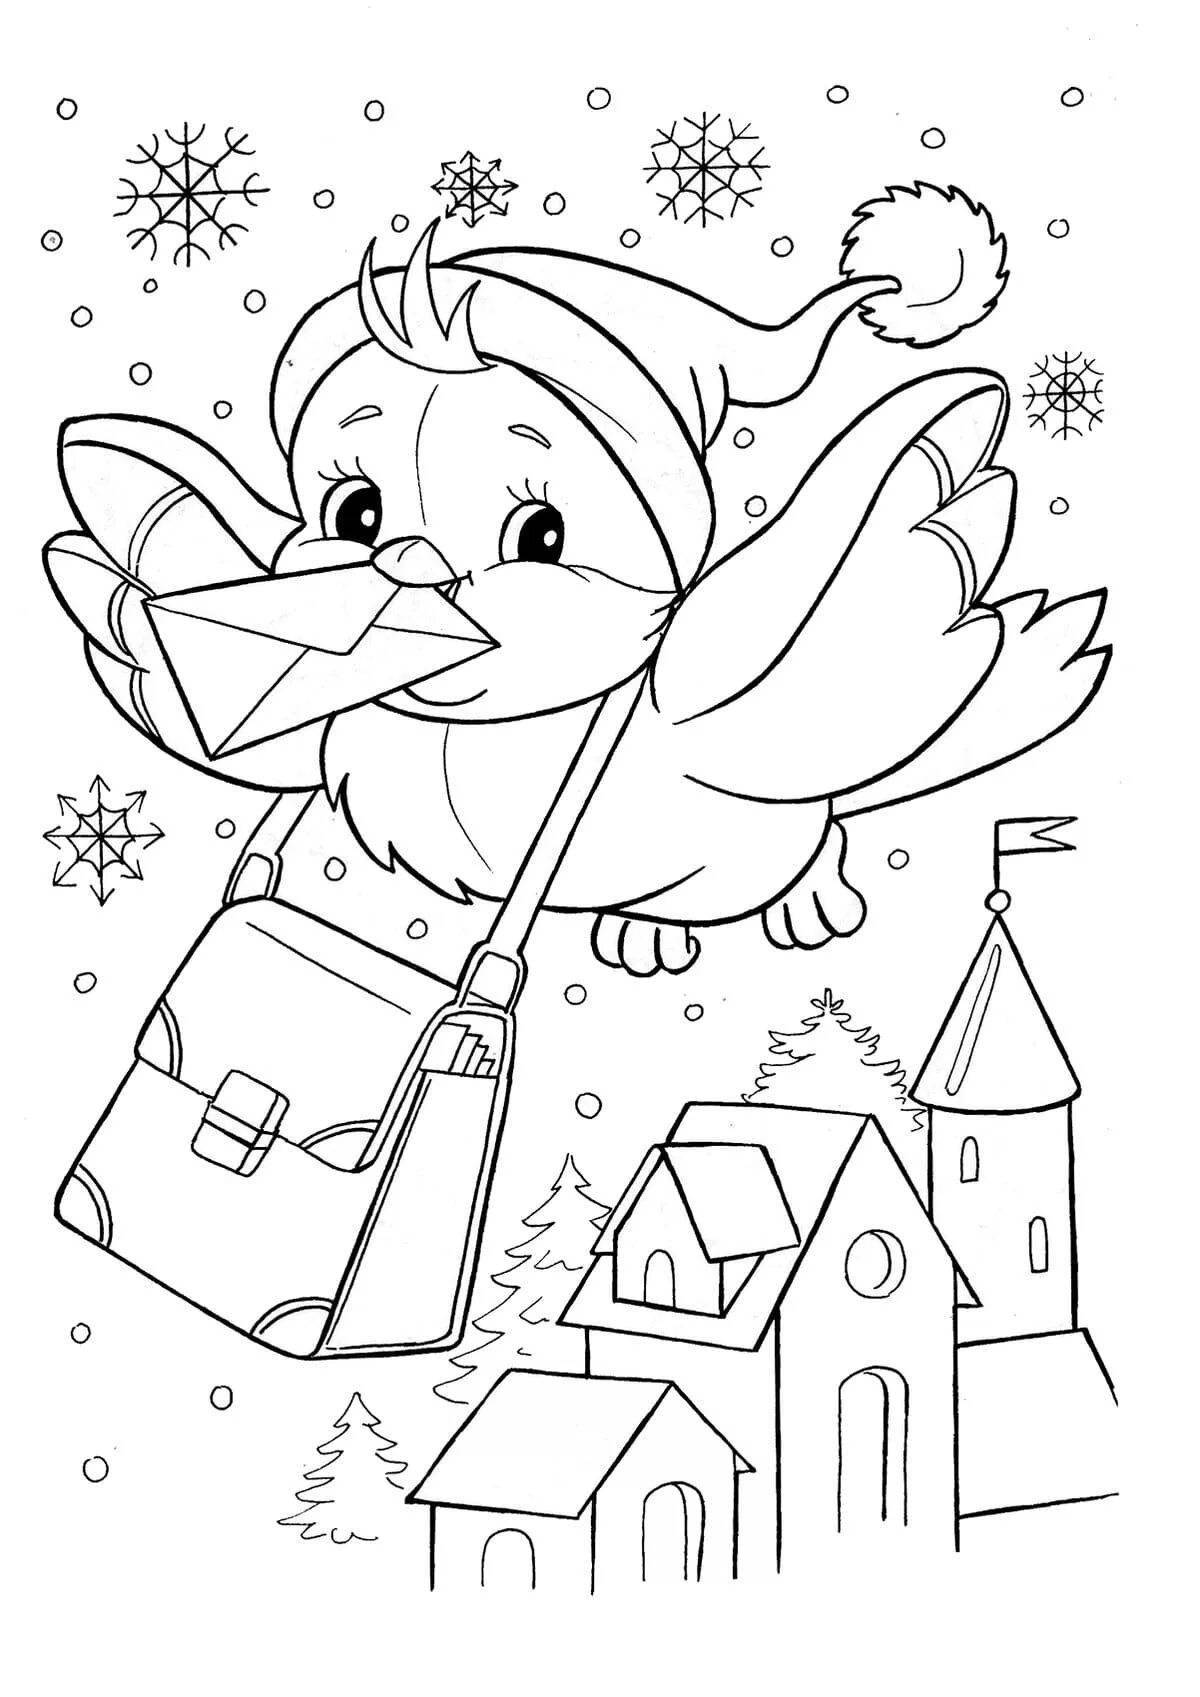 Luminous winter coloring book for children 3-4 years old